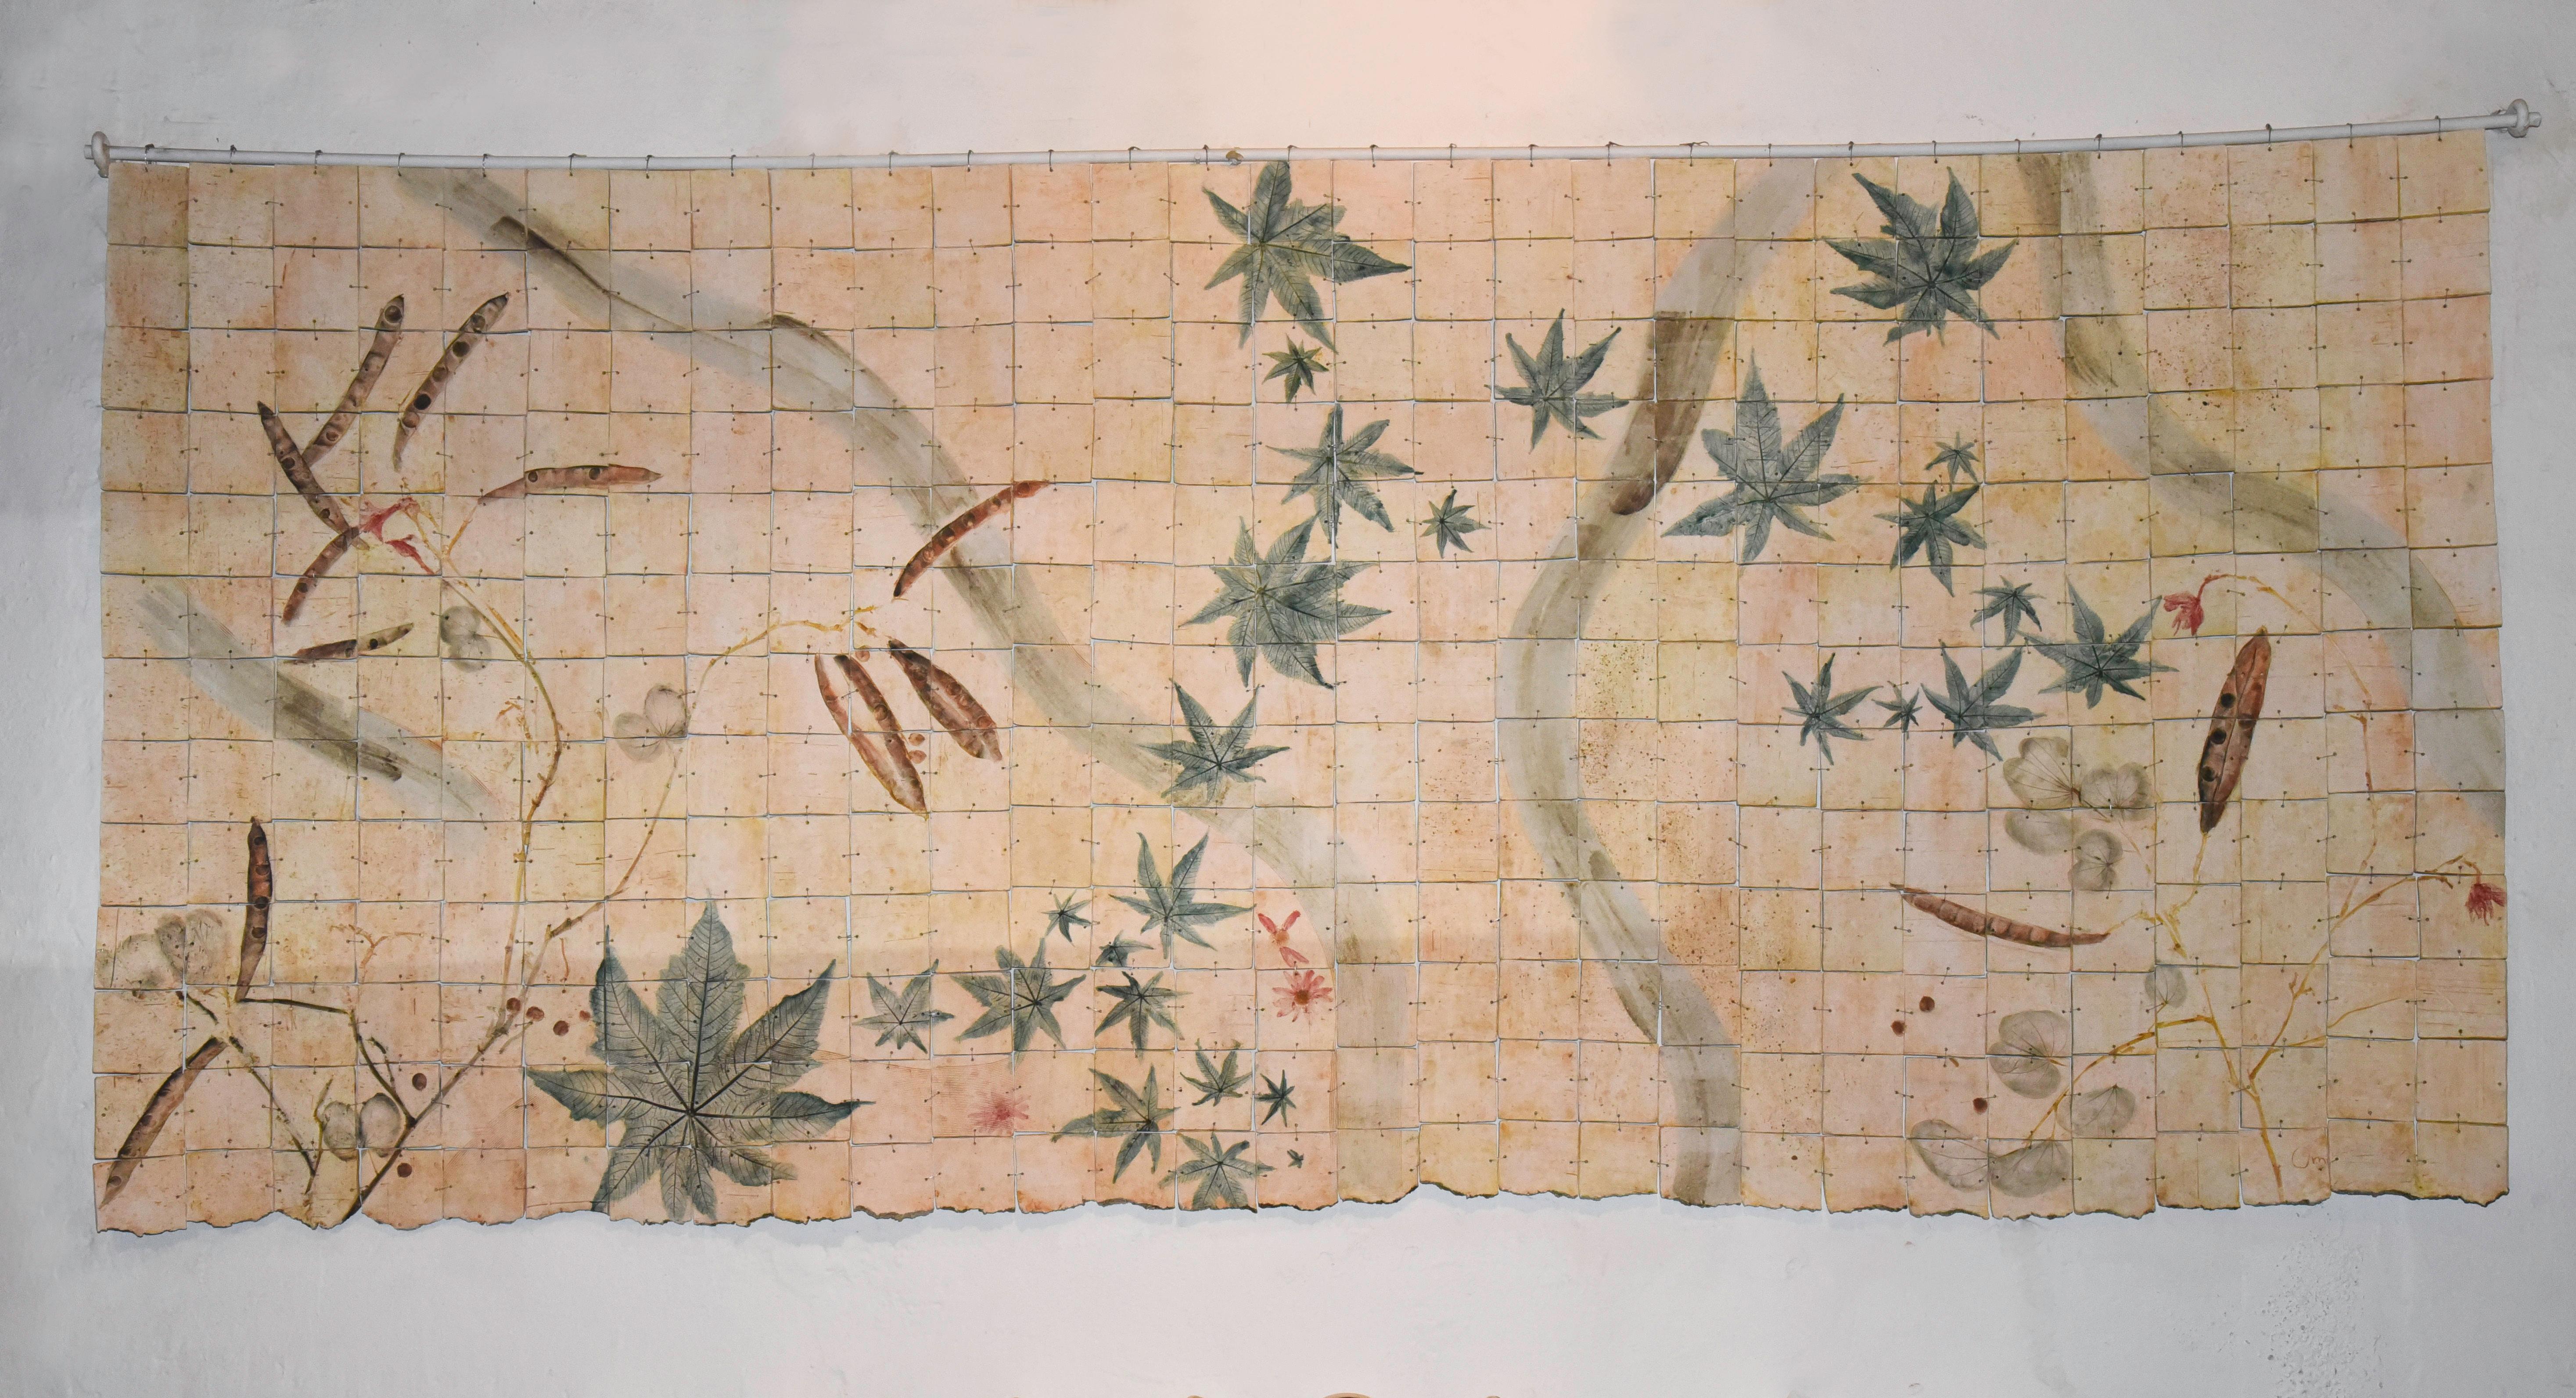 This wall decoration piece is a registration of the local plants in the state of Oaxaca, Mexico. Some of the plants printed are considered poisonous and farmers should be aware of them. While there are also many beautiful flowers and leafs that are